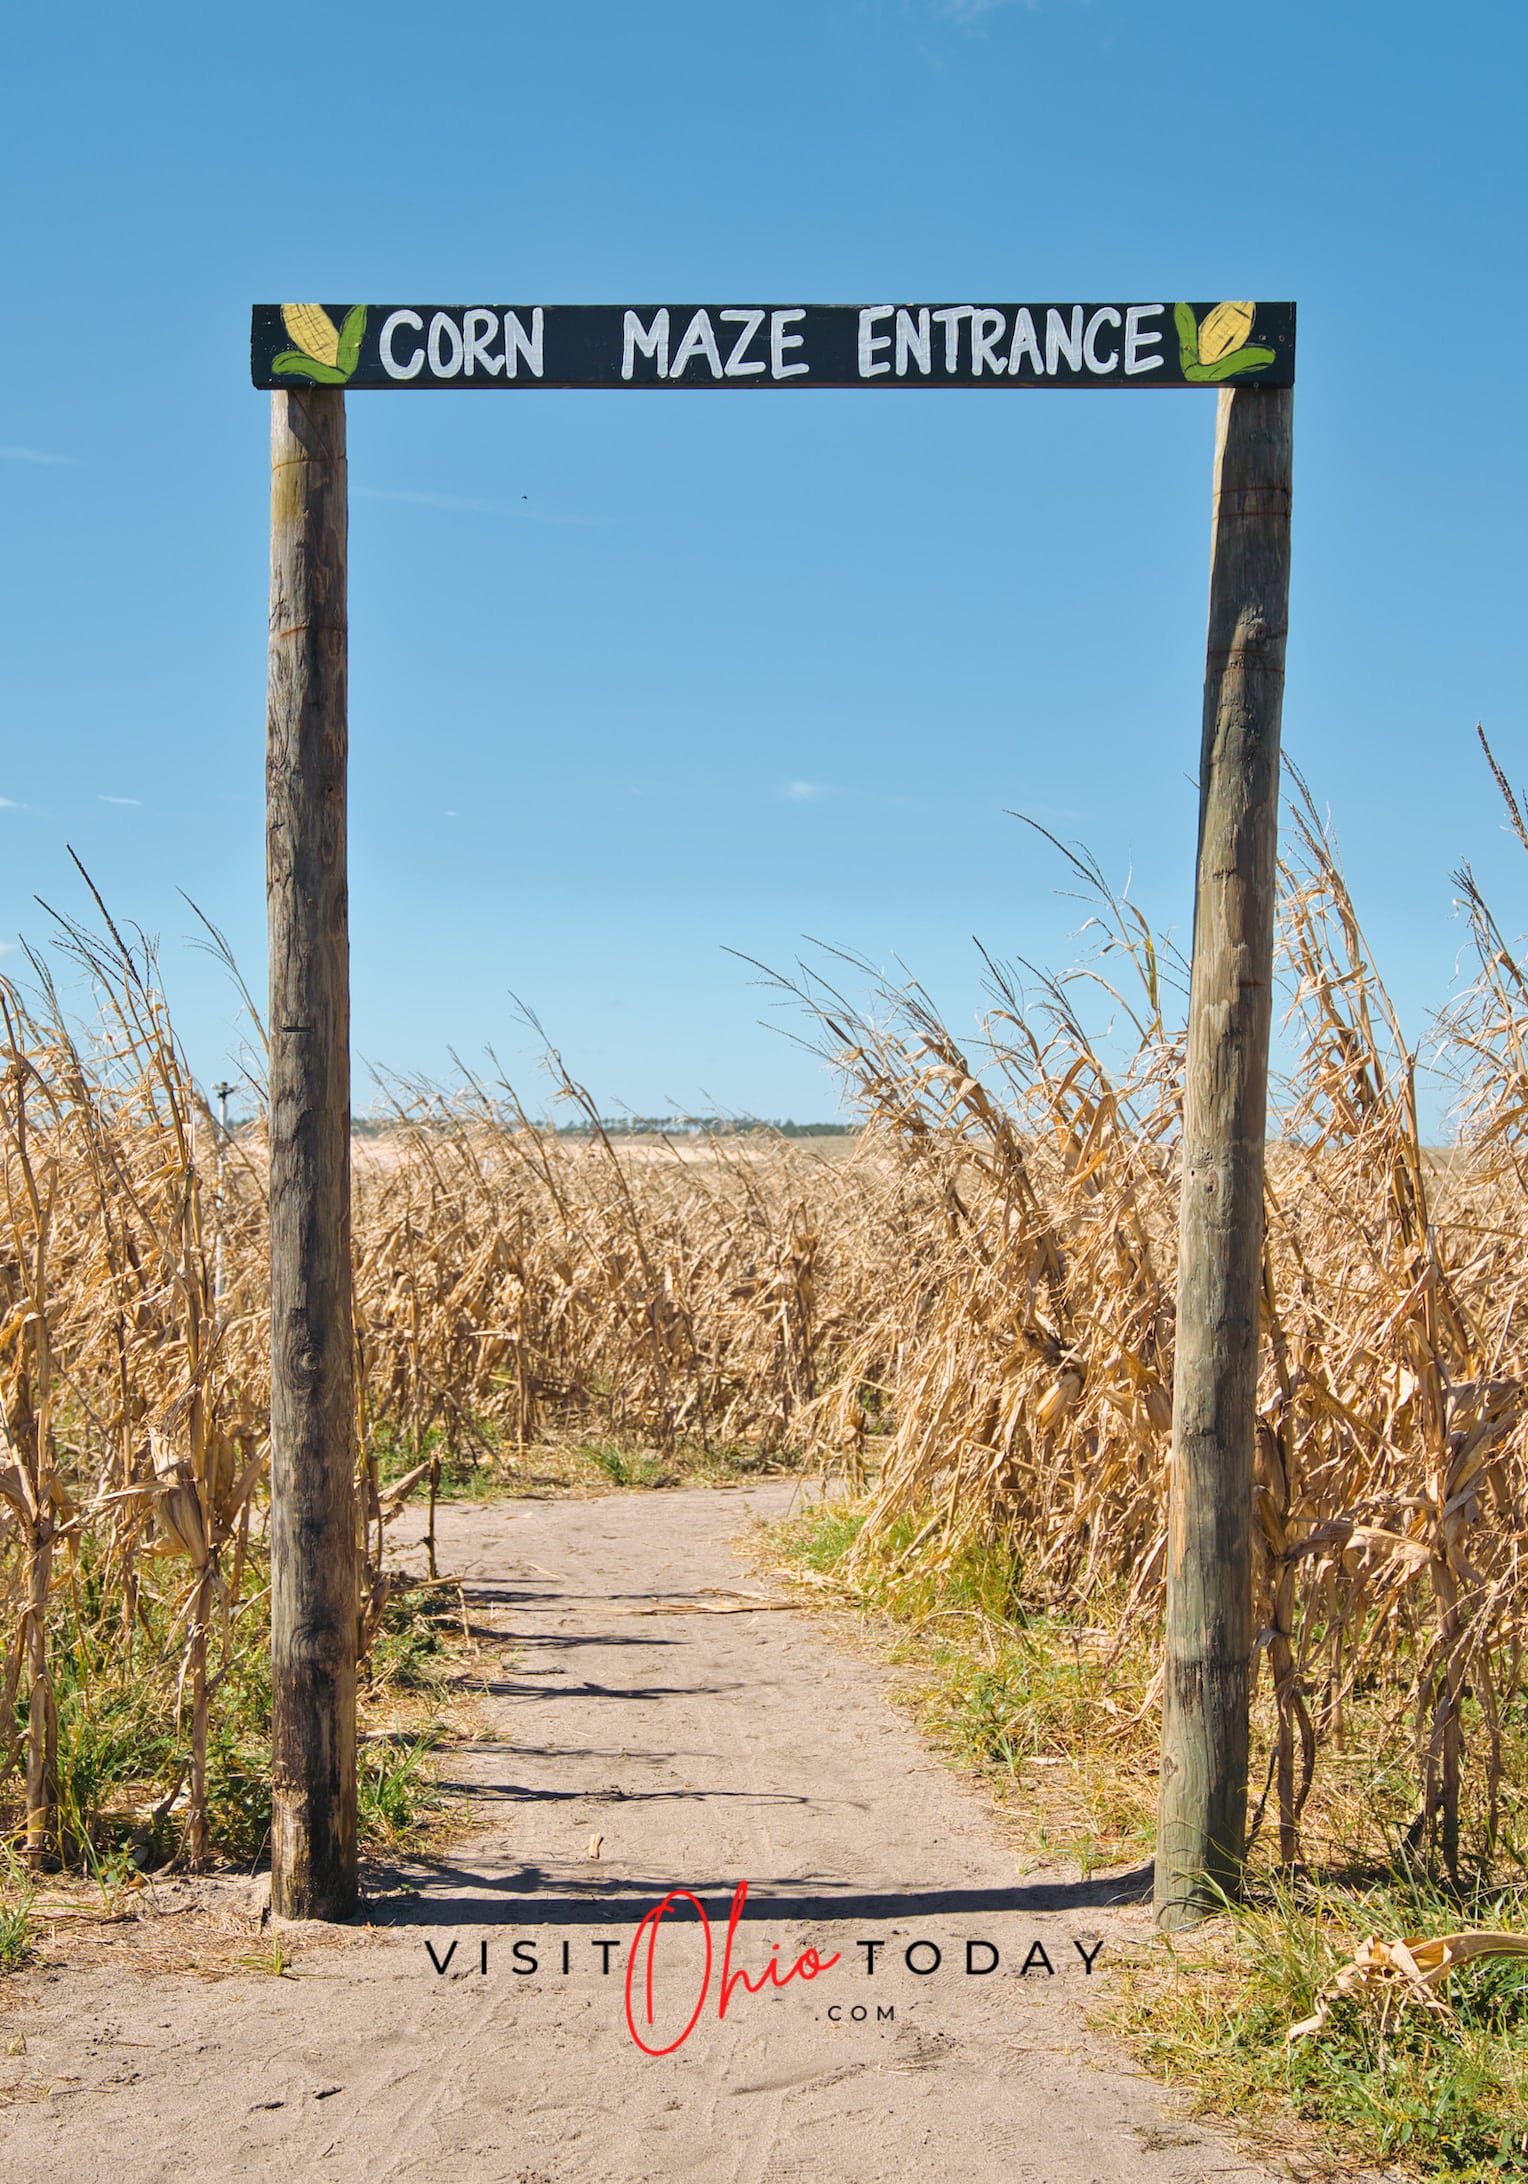 vertical photo showing the entrance to an almost finished corn maze against a blue sky